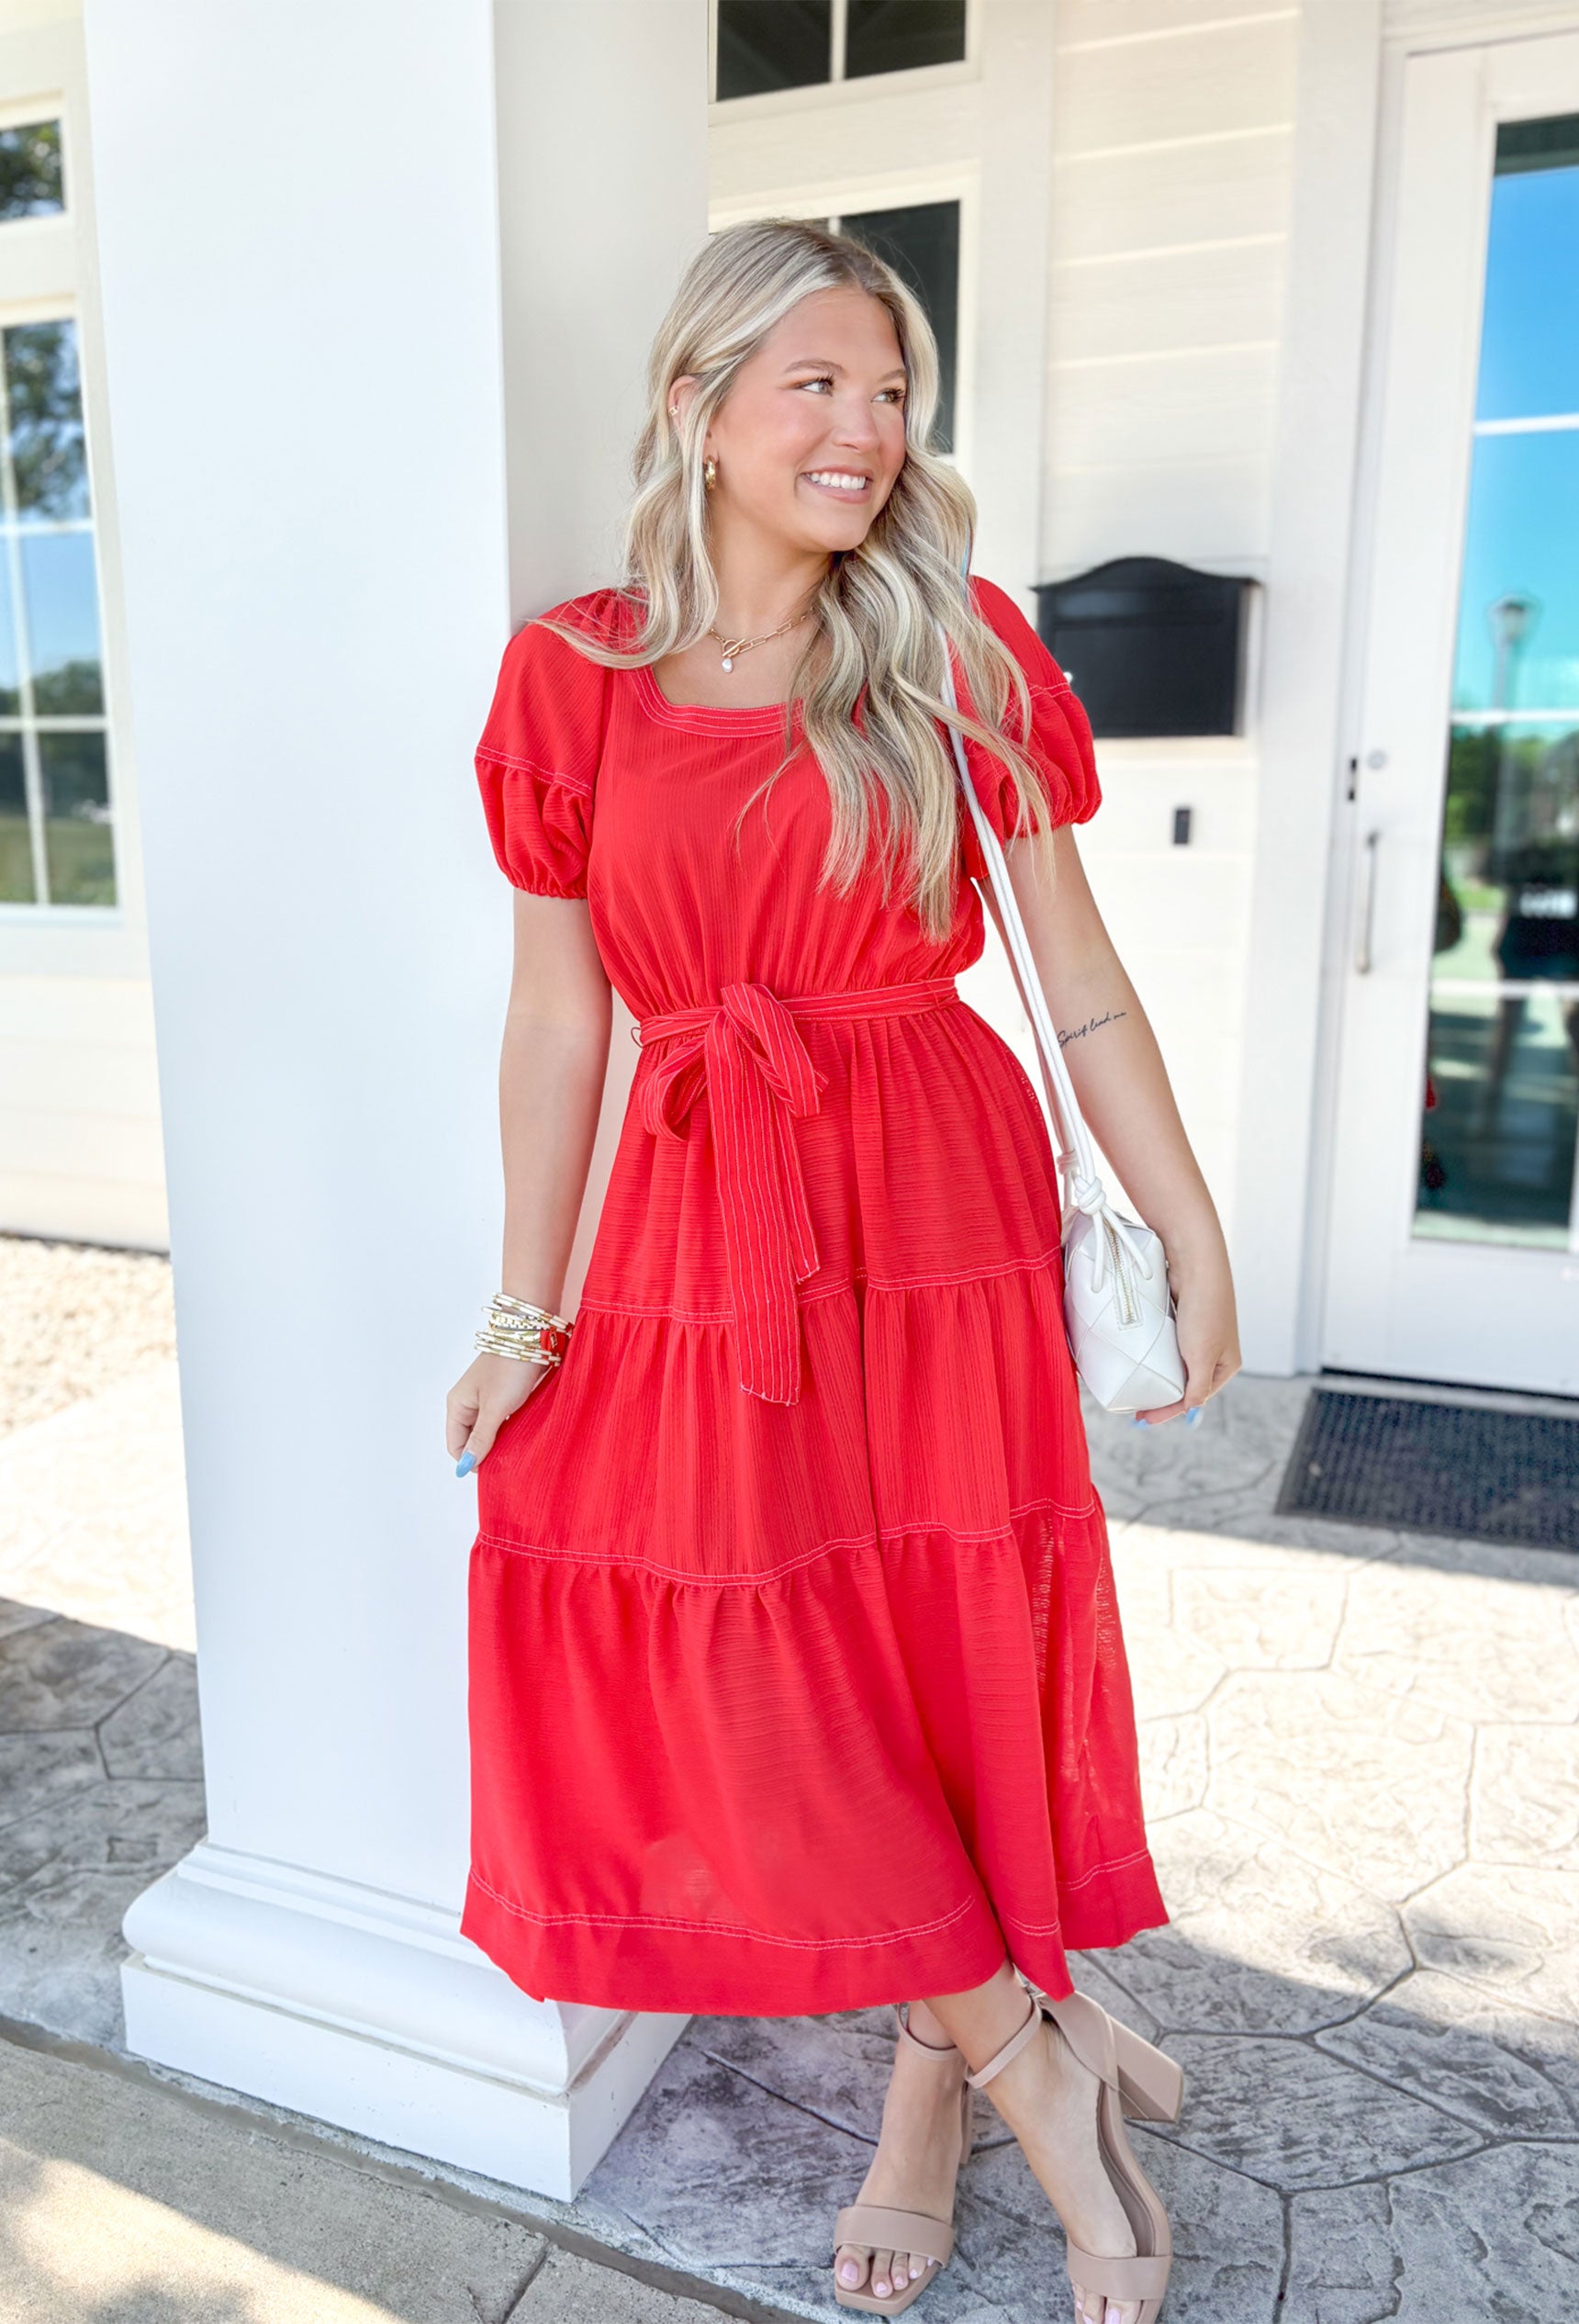 Summer Soiree Midi Dress. Red midi dress with tie around the waist. Puff sleeves and tiered detailing.